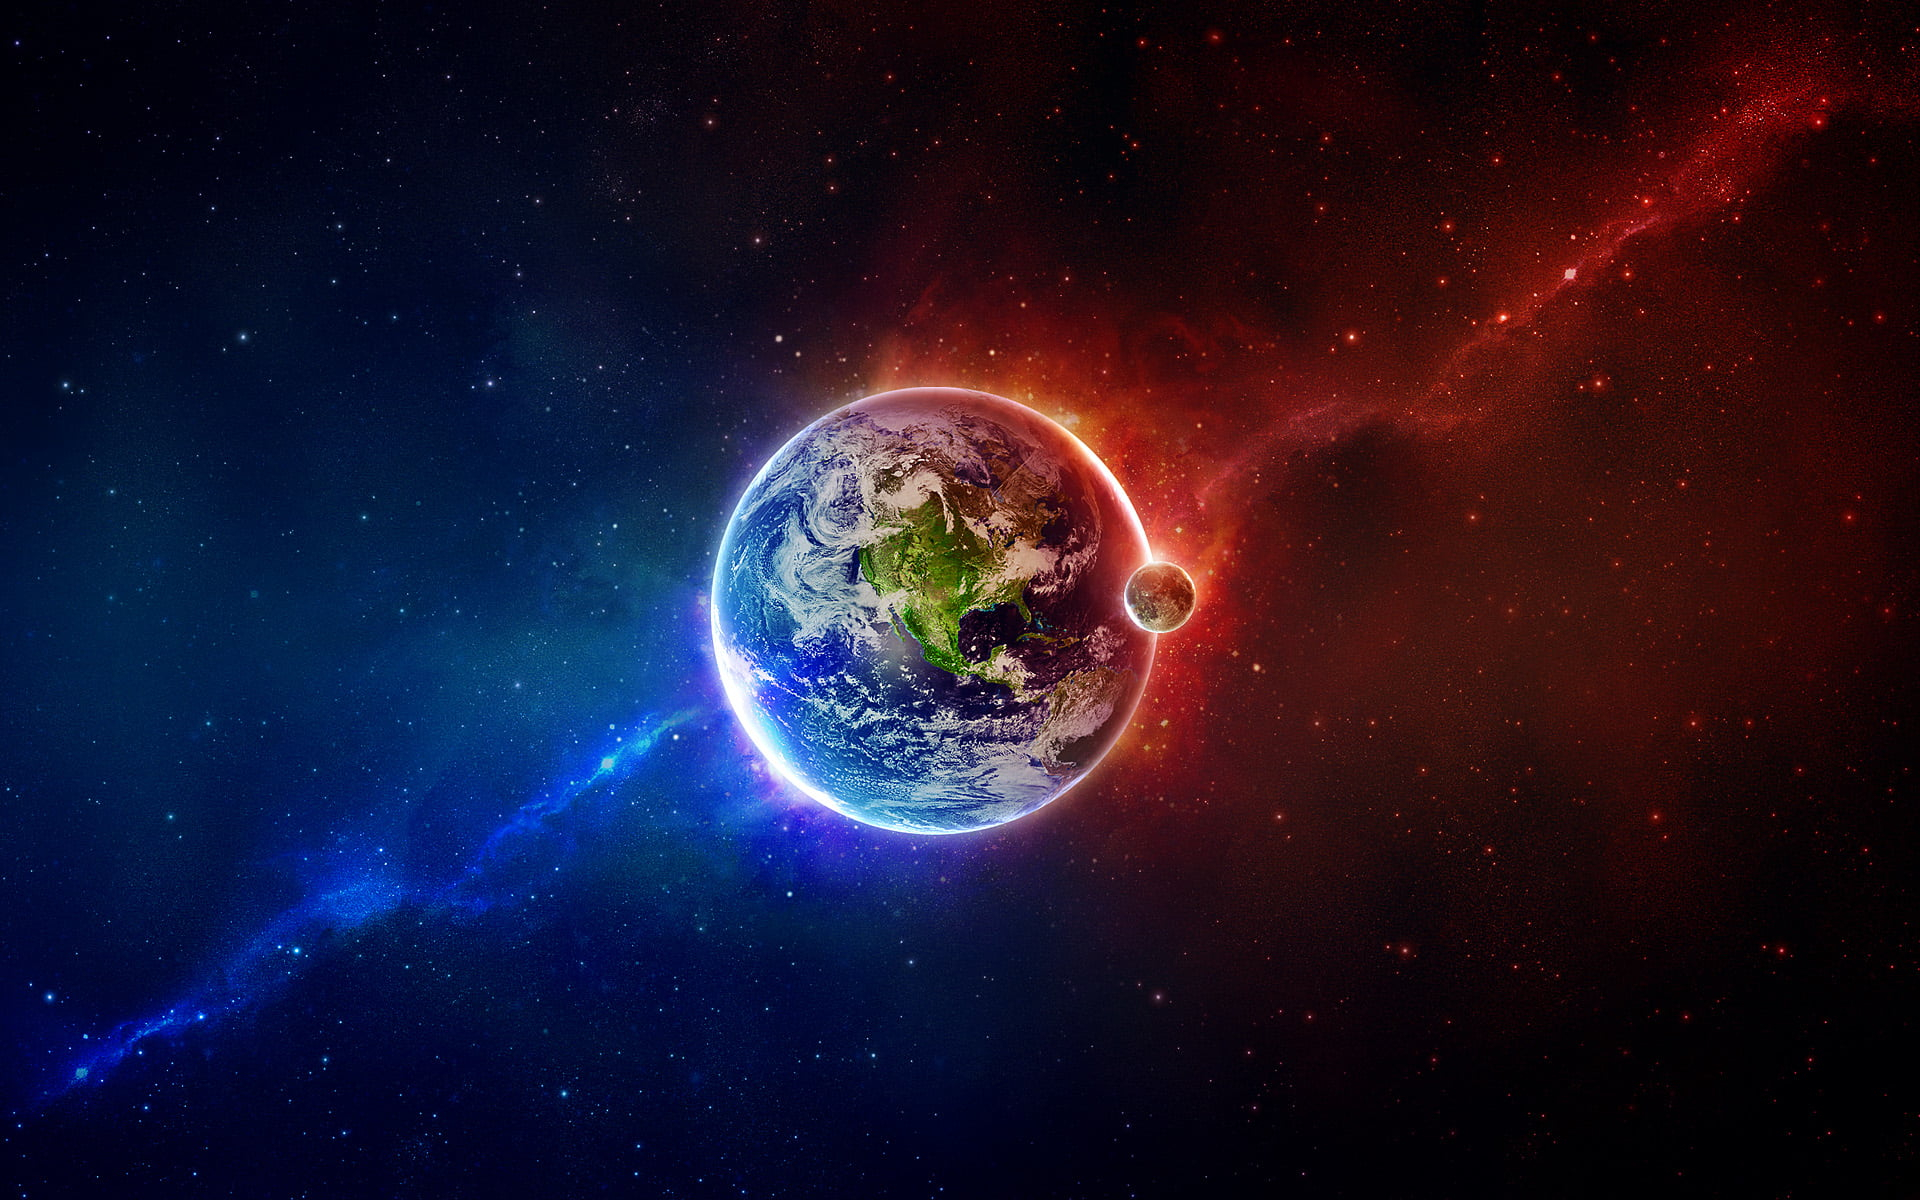 Wallpaper planet Earth and moon, illustration of planet Earth, space, abstract